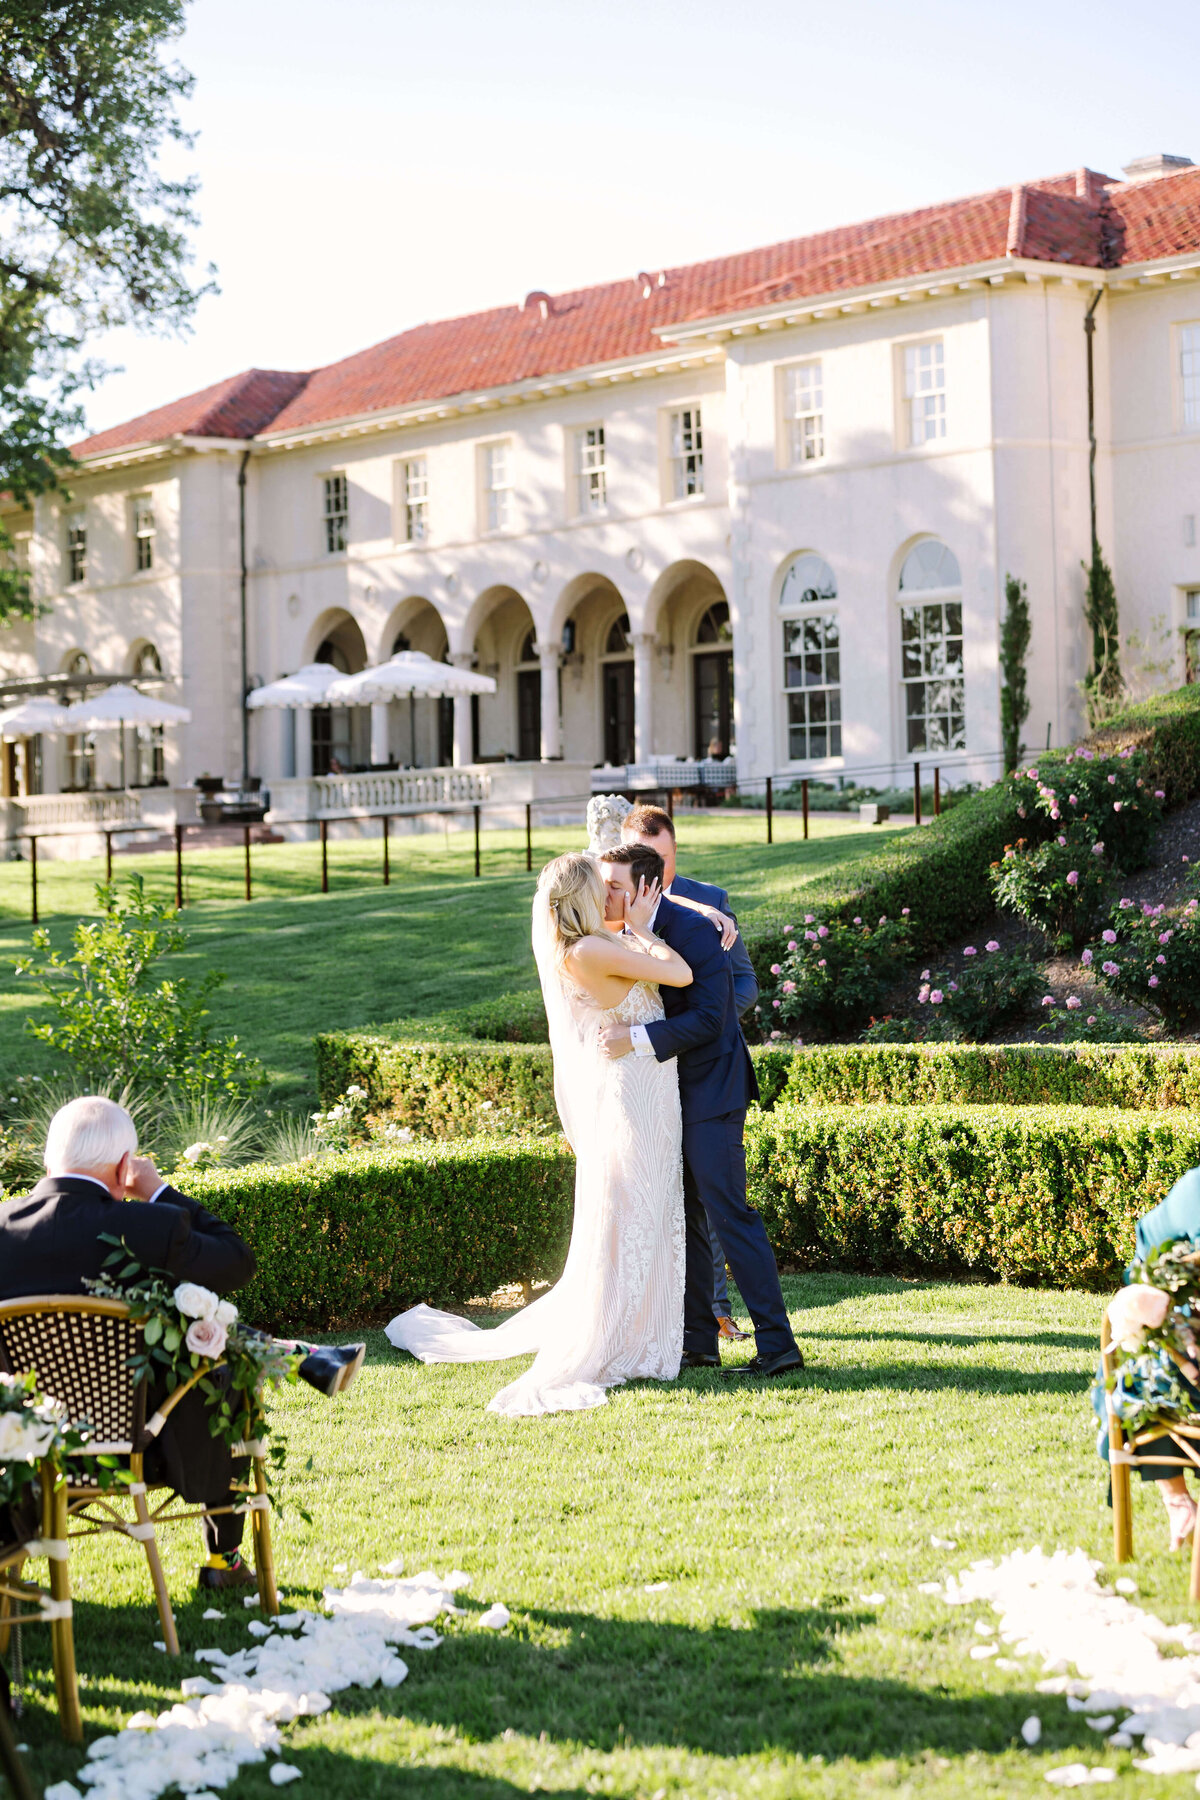 Elopement ceremony in the Sunken Garden at Commodore Perry Estate